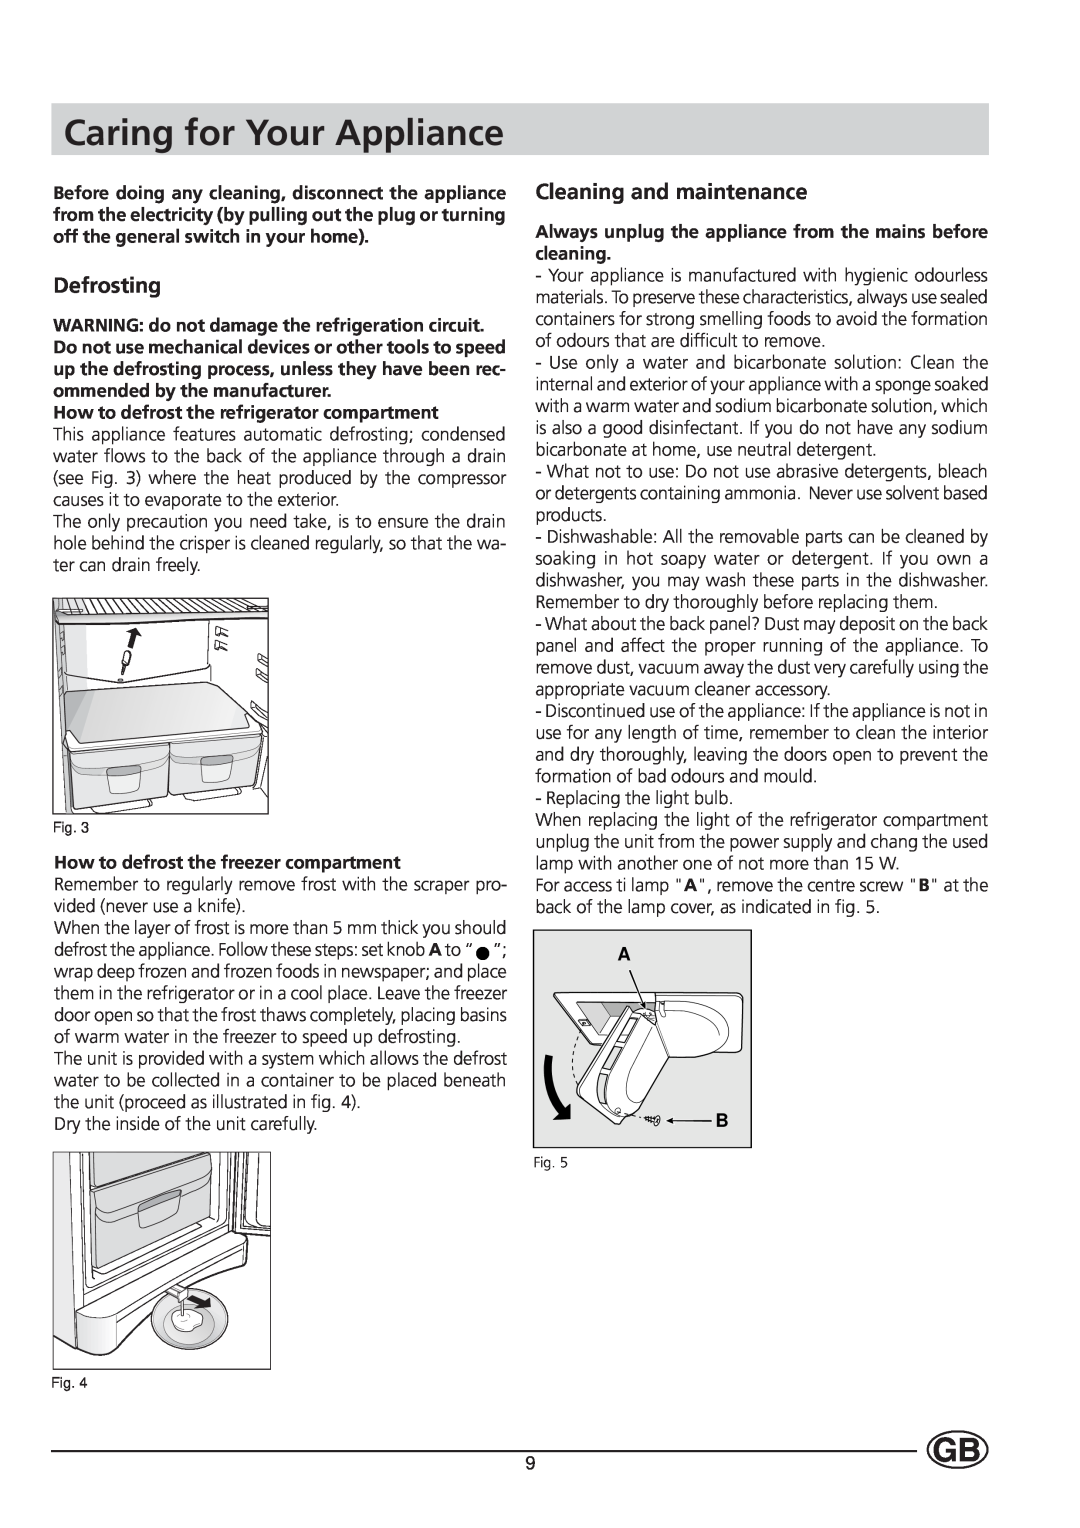 Indesit BA 13 GF Caring for Your Appliance, Defrosting, Cleaning and maintenance, How to defrost the freezer compartment 